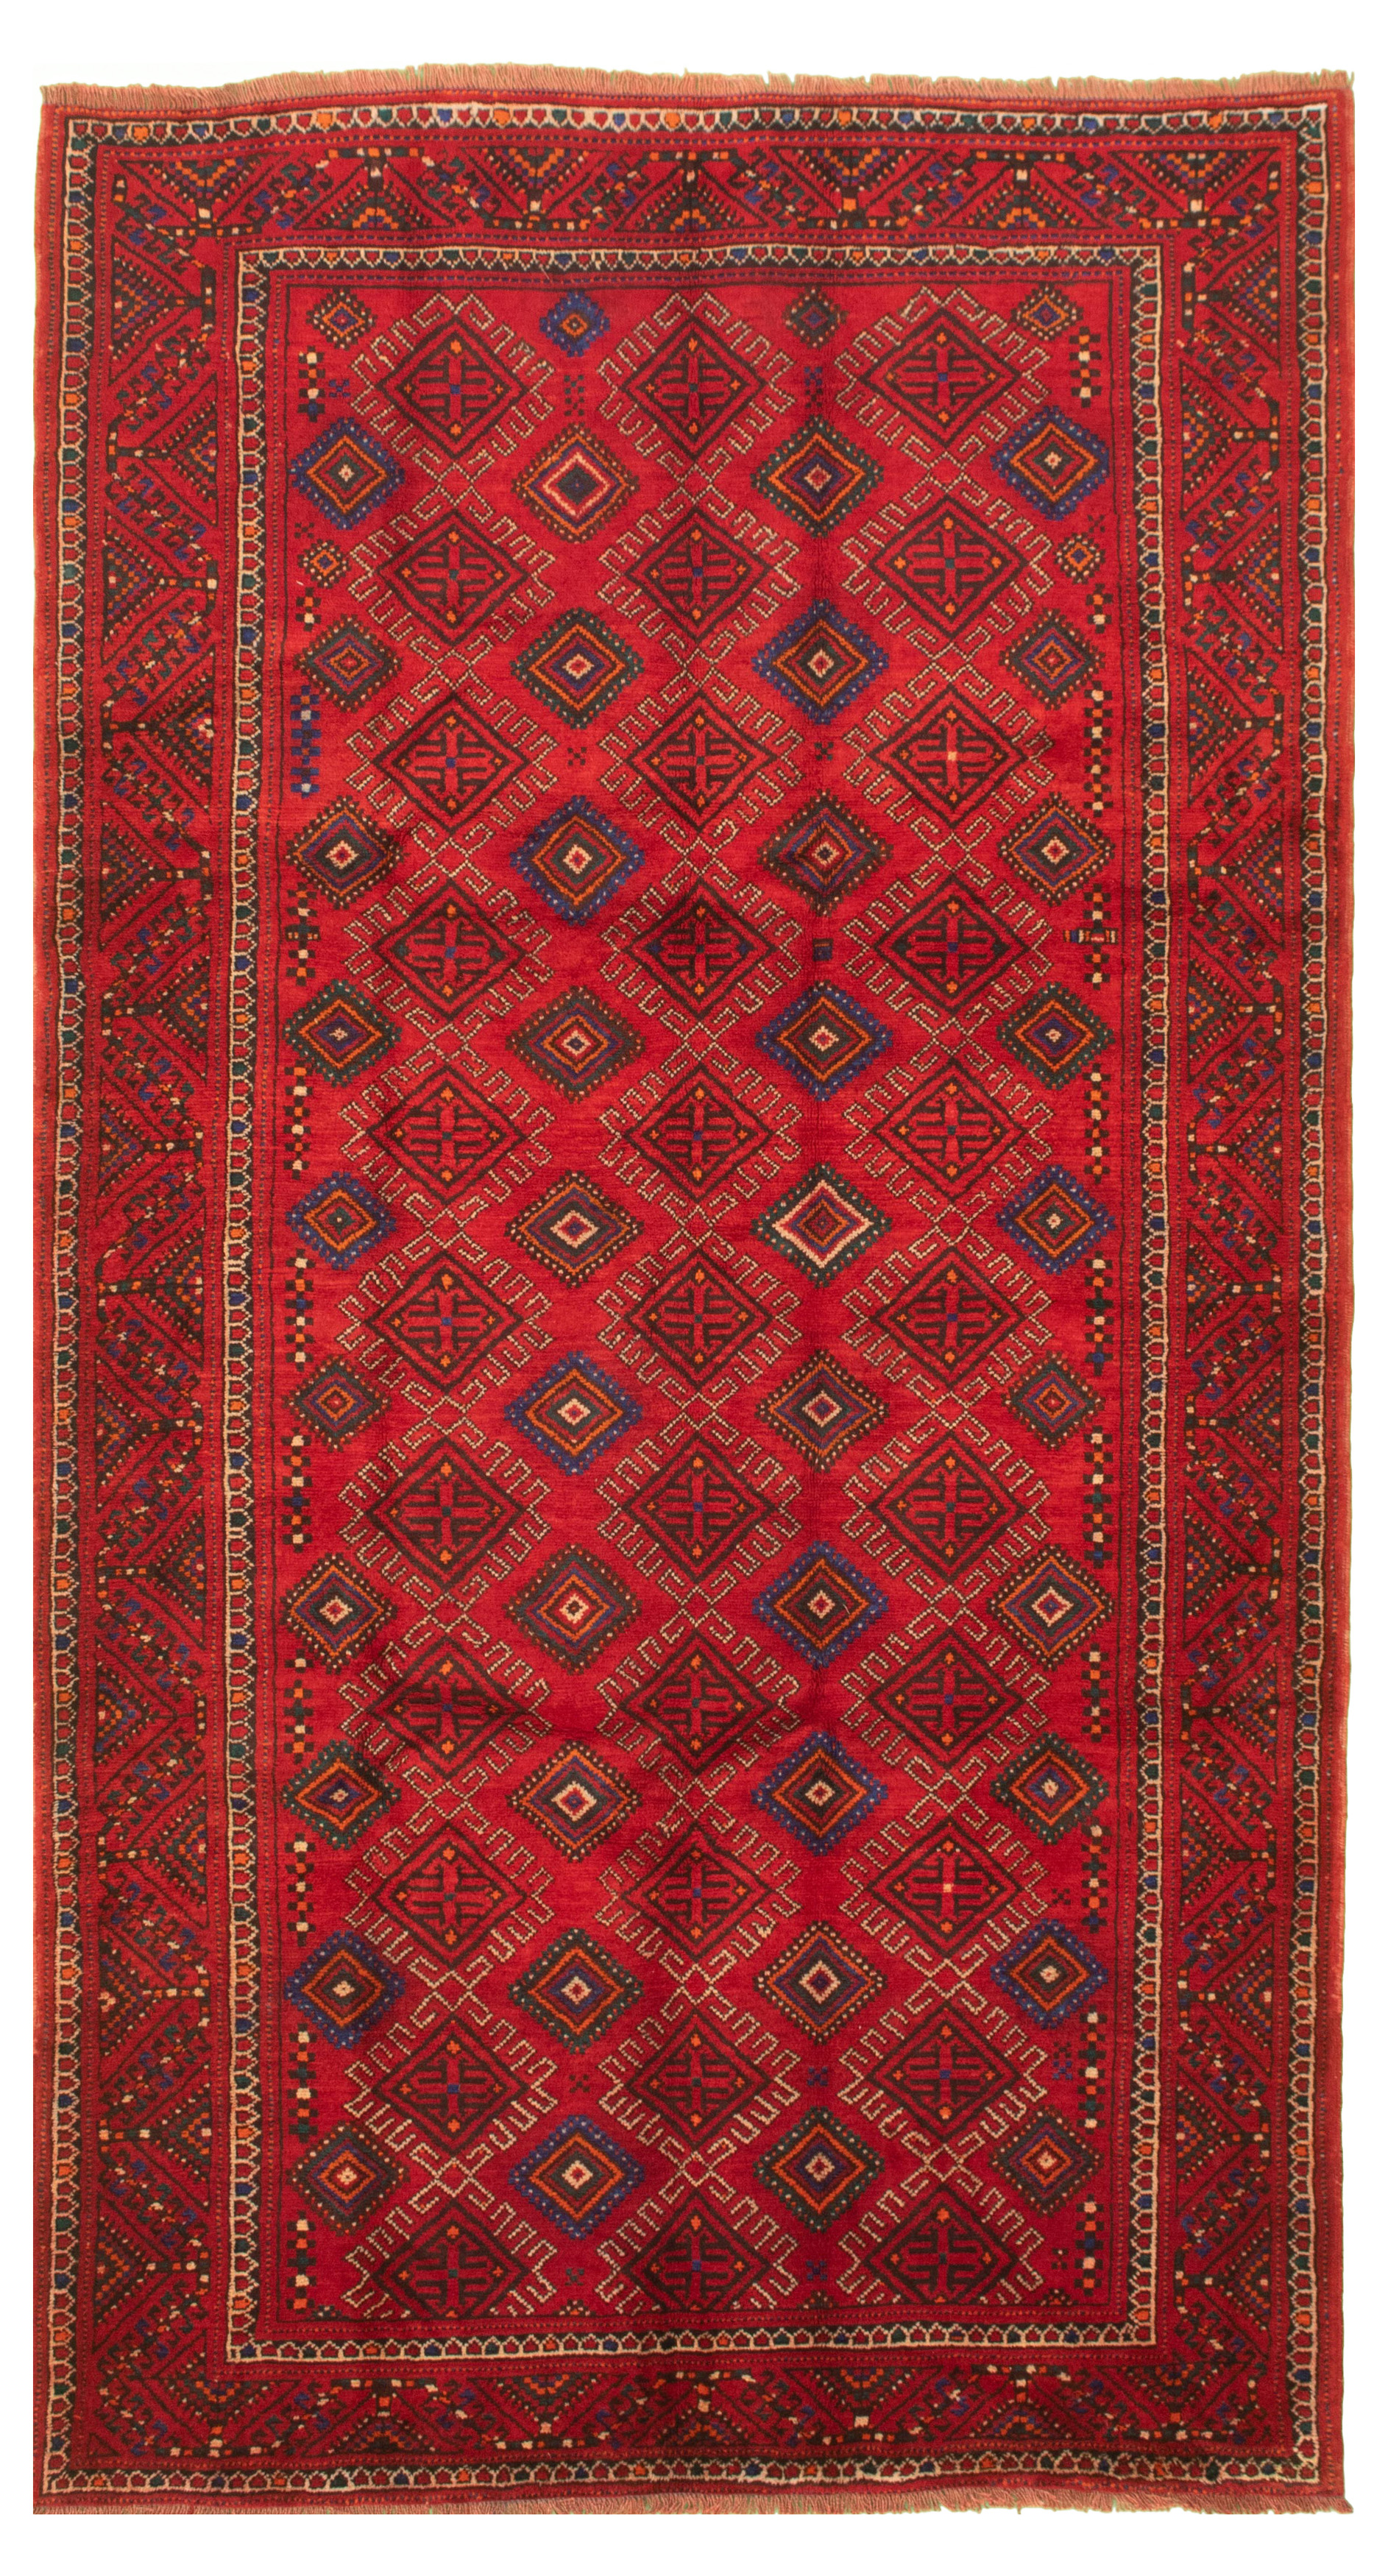 Hand-knotted Authentic Turkish Red Wool Rug 5'0" x 9'6" Size: 5'0" x 9'6"  